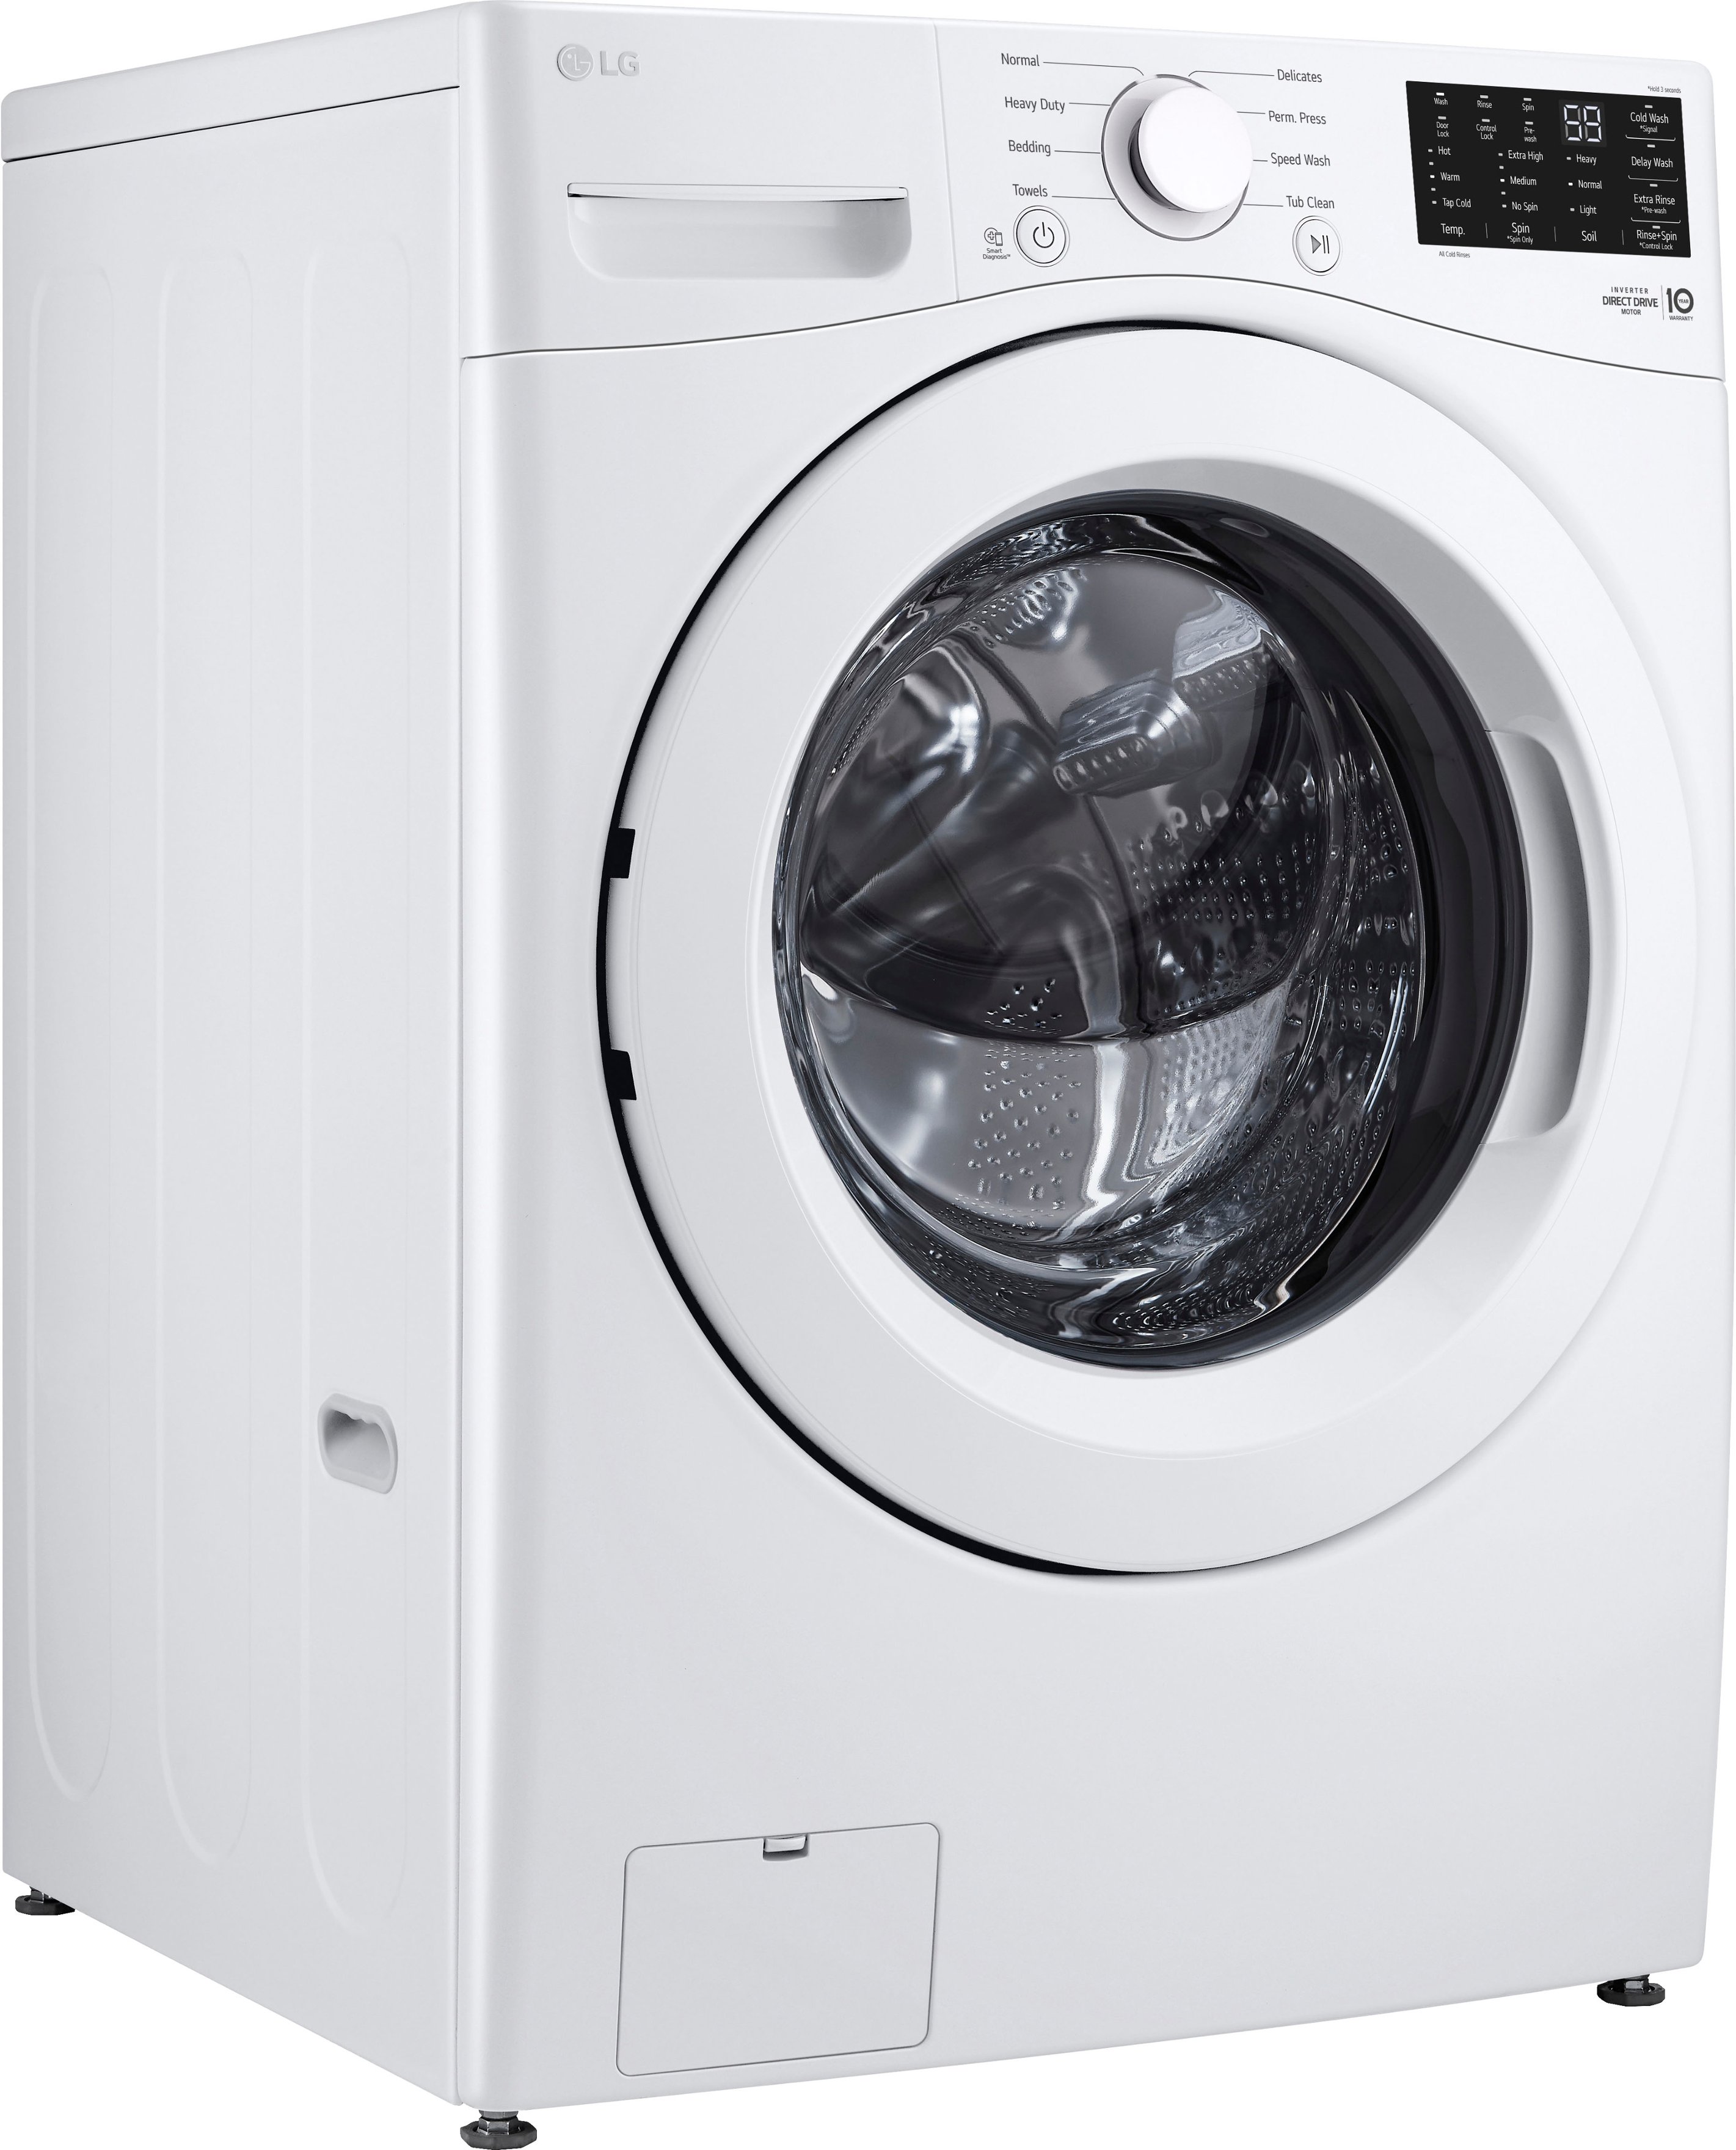 LG 5.0 Cu. Ft. High-Efficiency Front Load Washer with 6Motion Technology  White WM3470CW - Best Buy